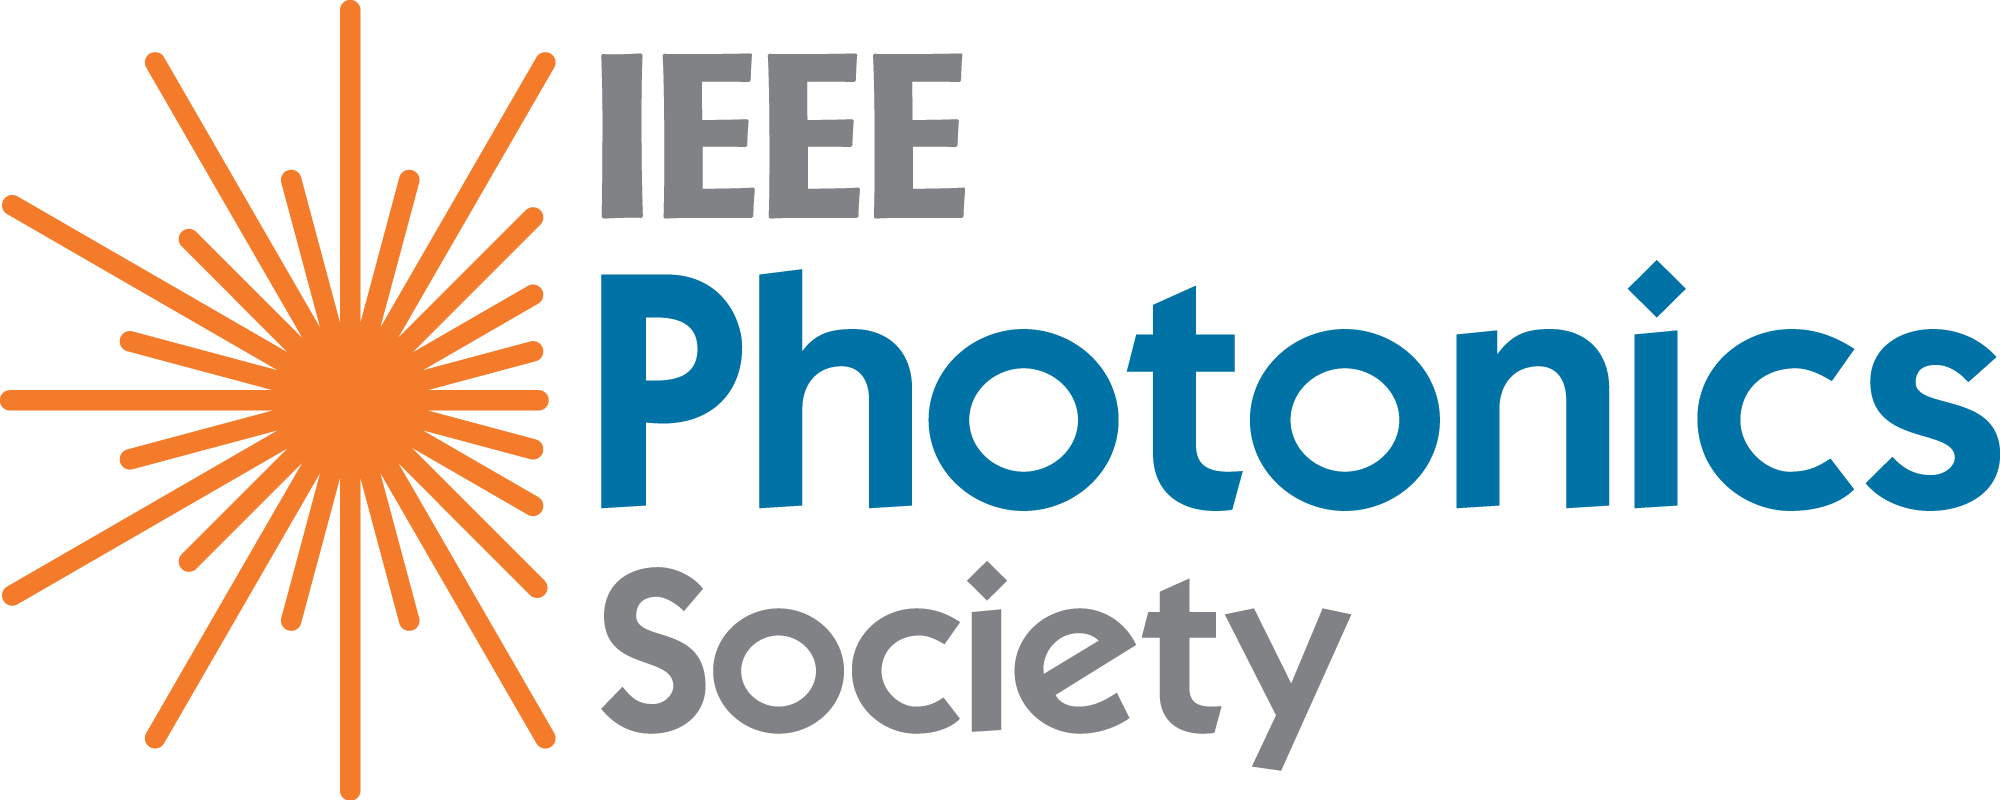 Ieee Photonics Society - Ieee Photonics Society Logo Clipart (2000x800), Png Download